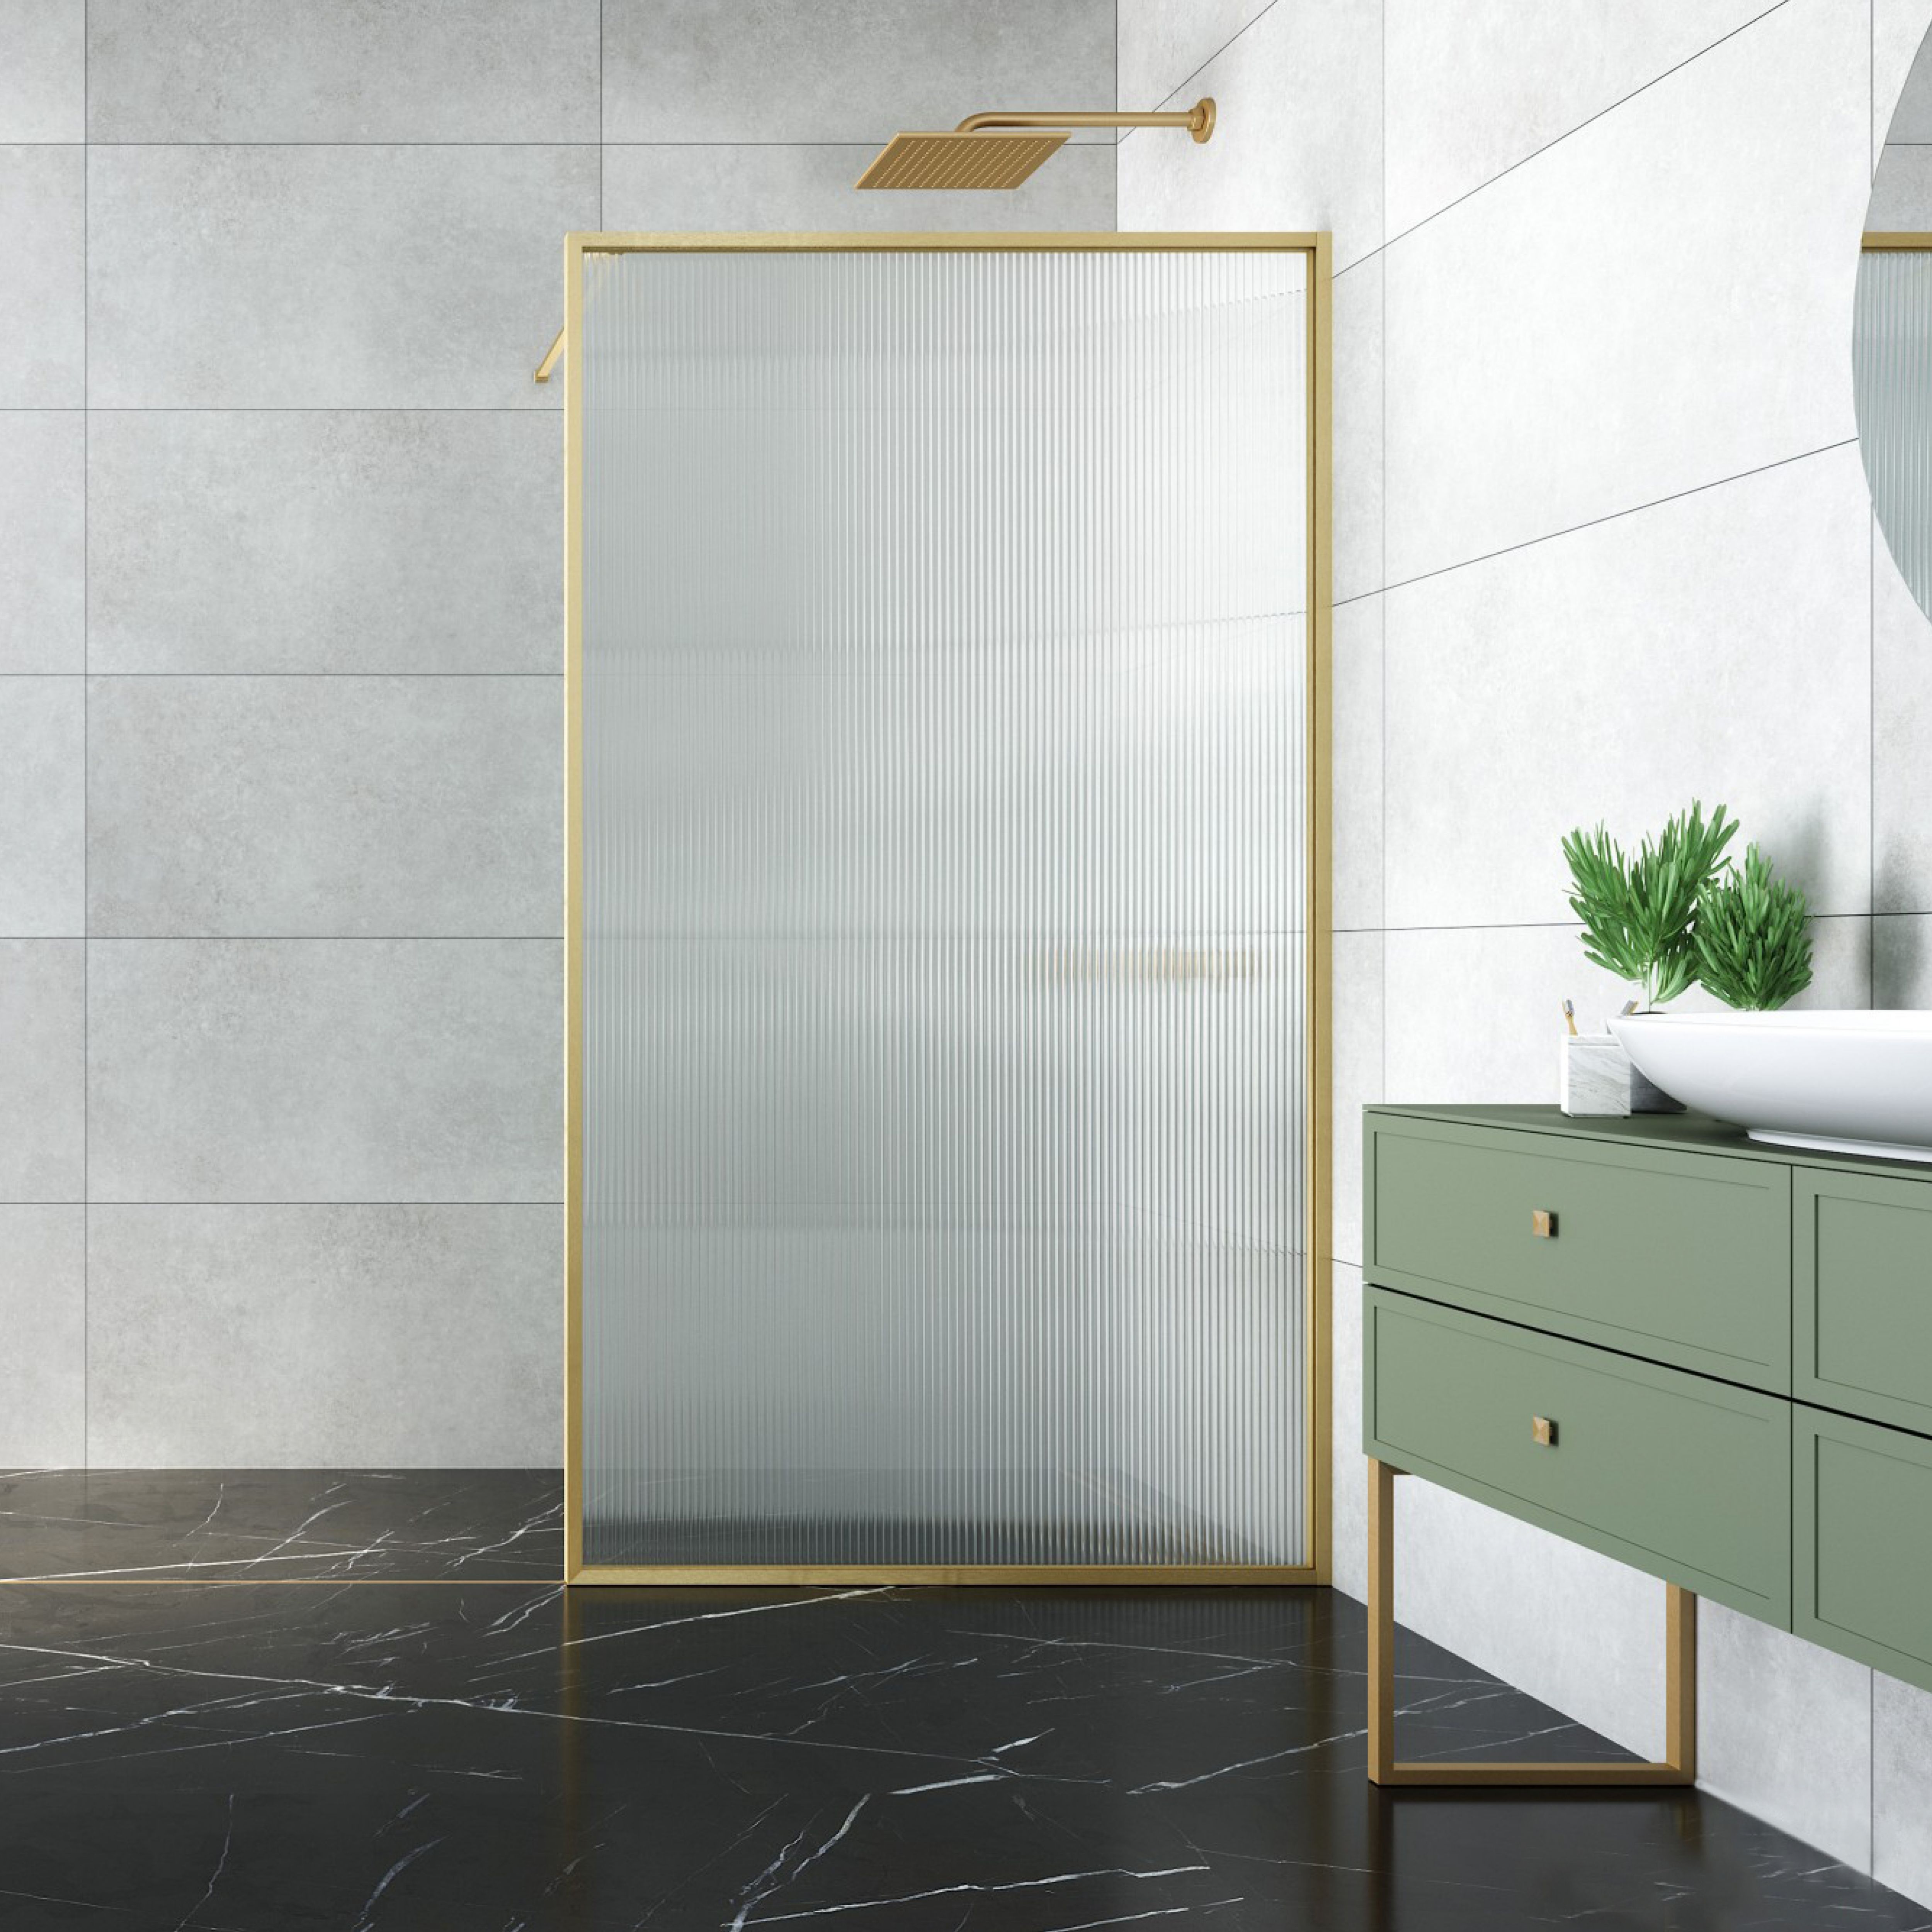 Aqualux AQ PRO Brushed Brass Fluted Single Wet room glass screen (H)200cm (W)120cm